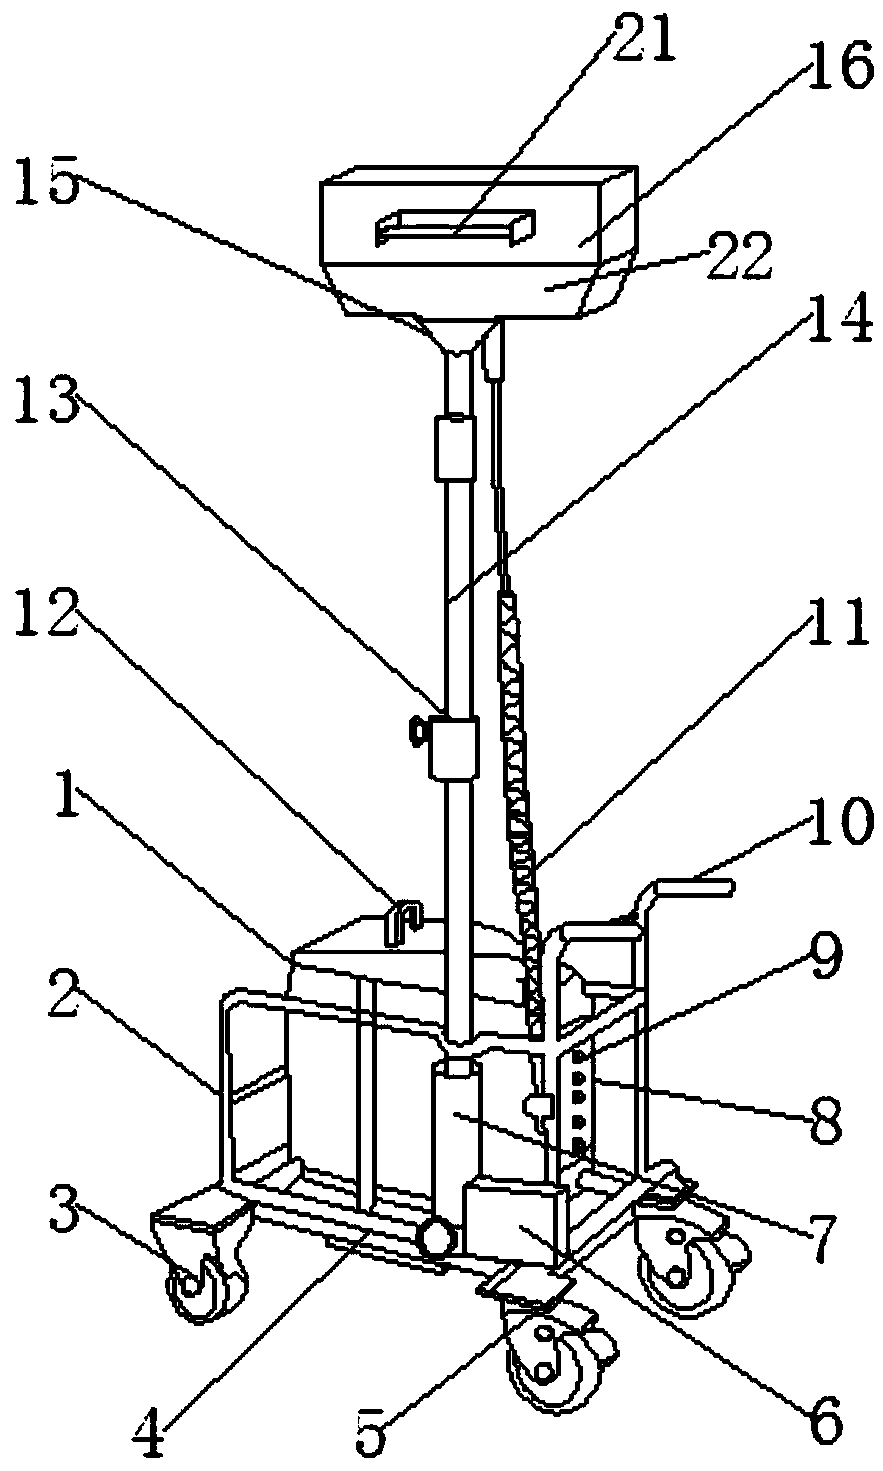 Electronic equipment detection device